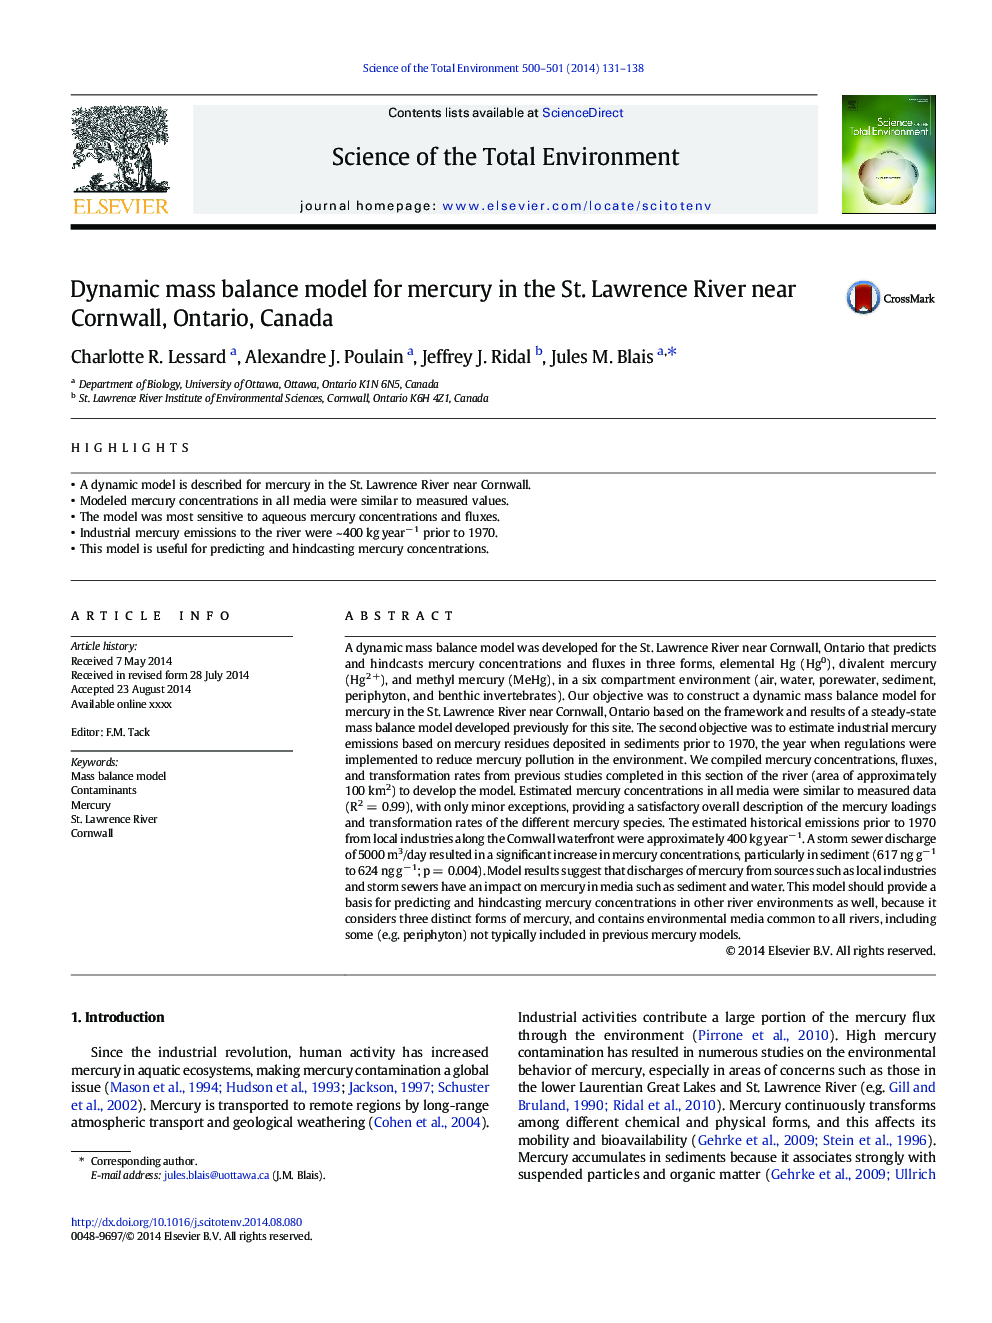 Dynamic mass balance model for mercury in the St. Lawrence River near Cornwall, Ontario, Canada